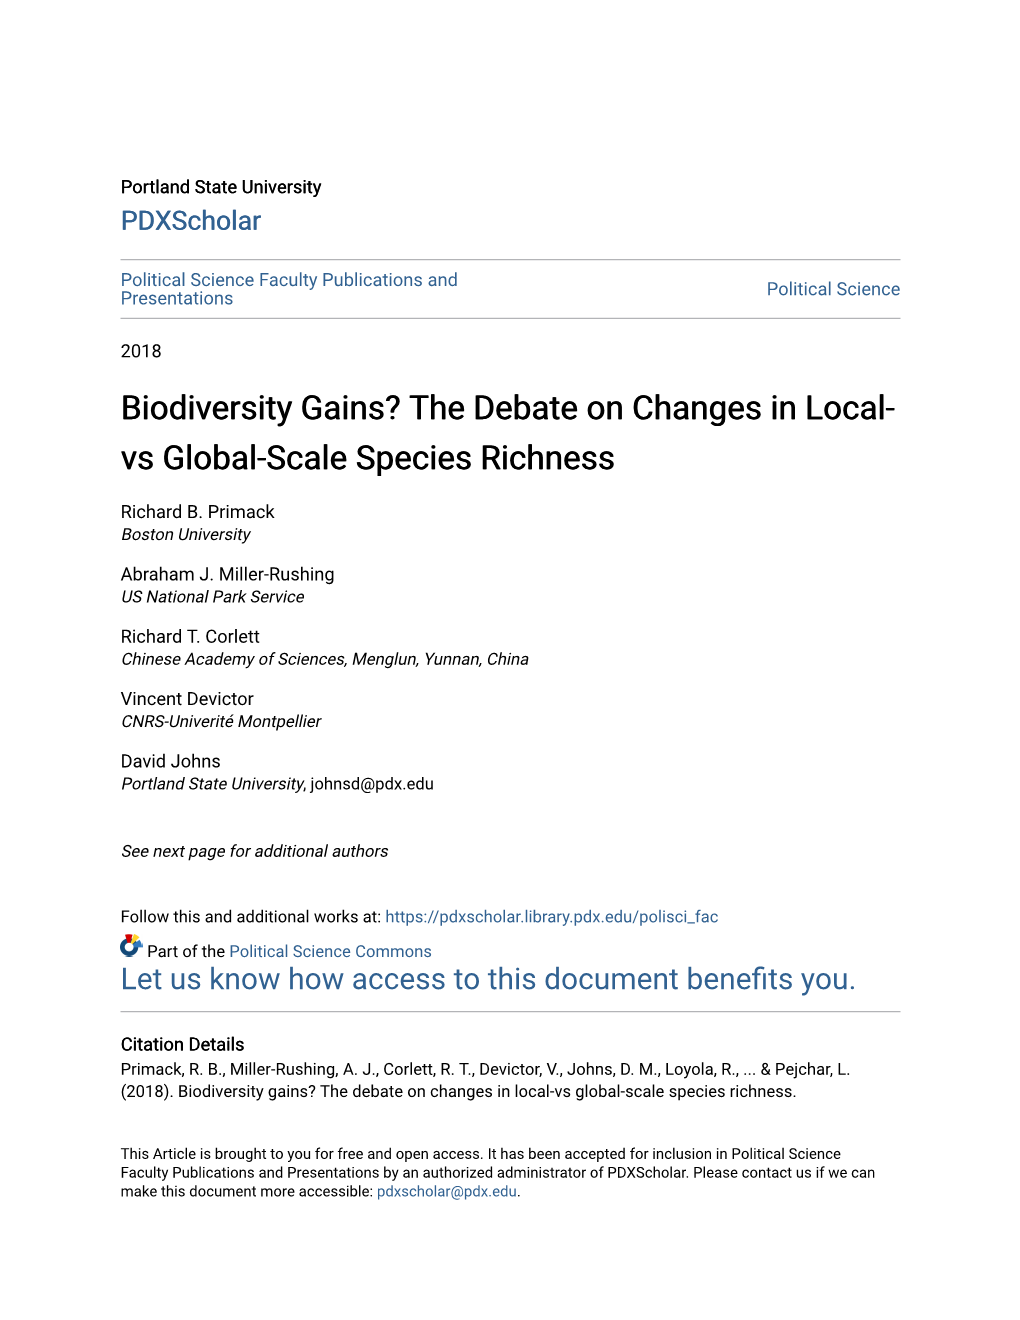 Biodiversity Gains? the Debate on Changes in Local- Vs Global-Scale Species Richness